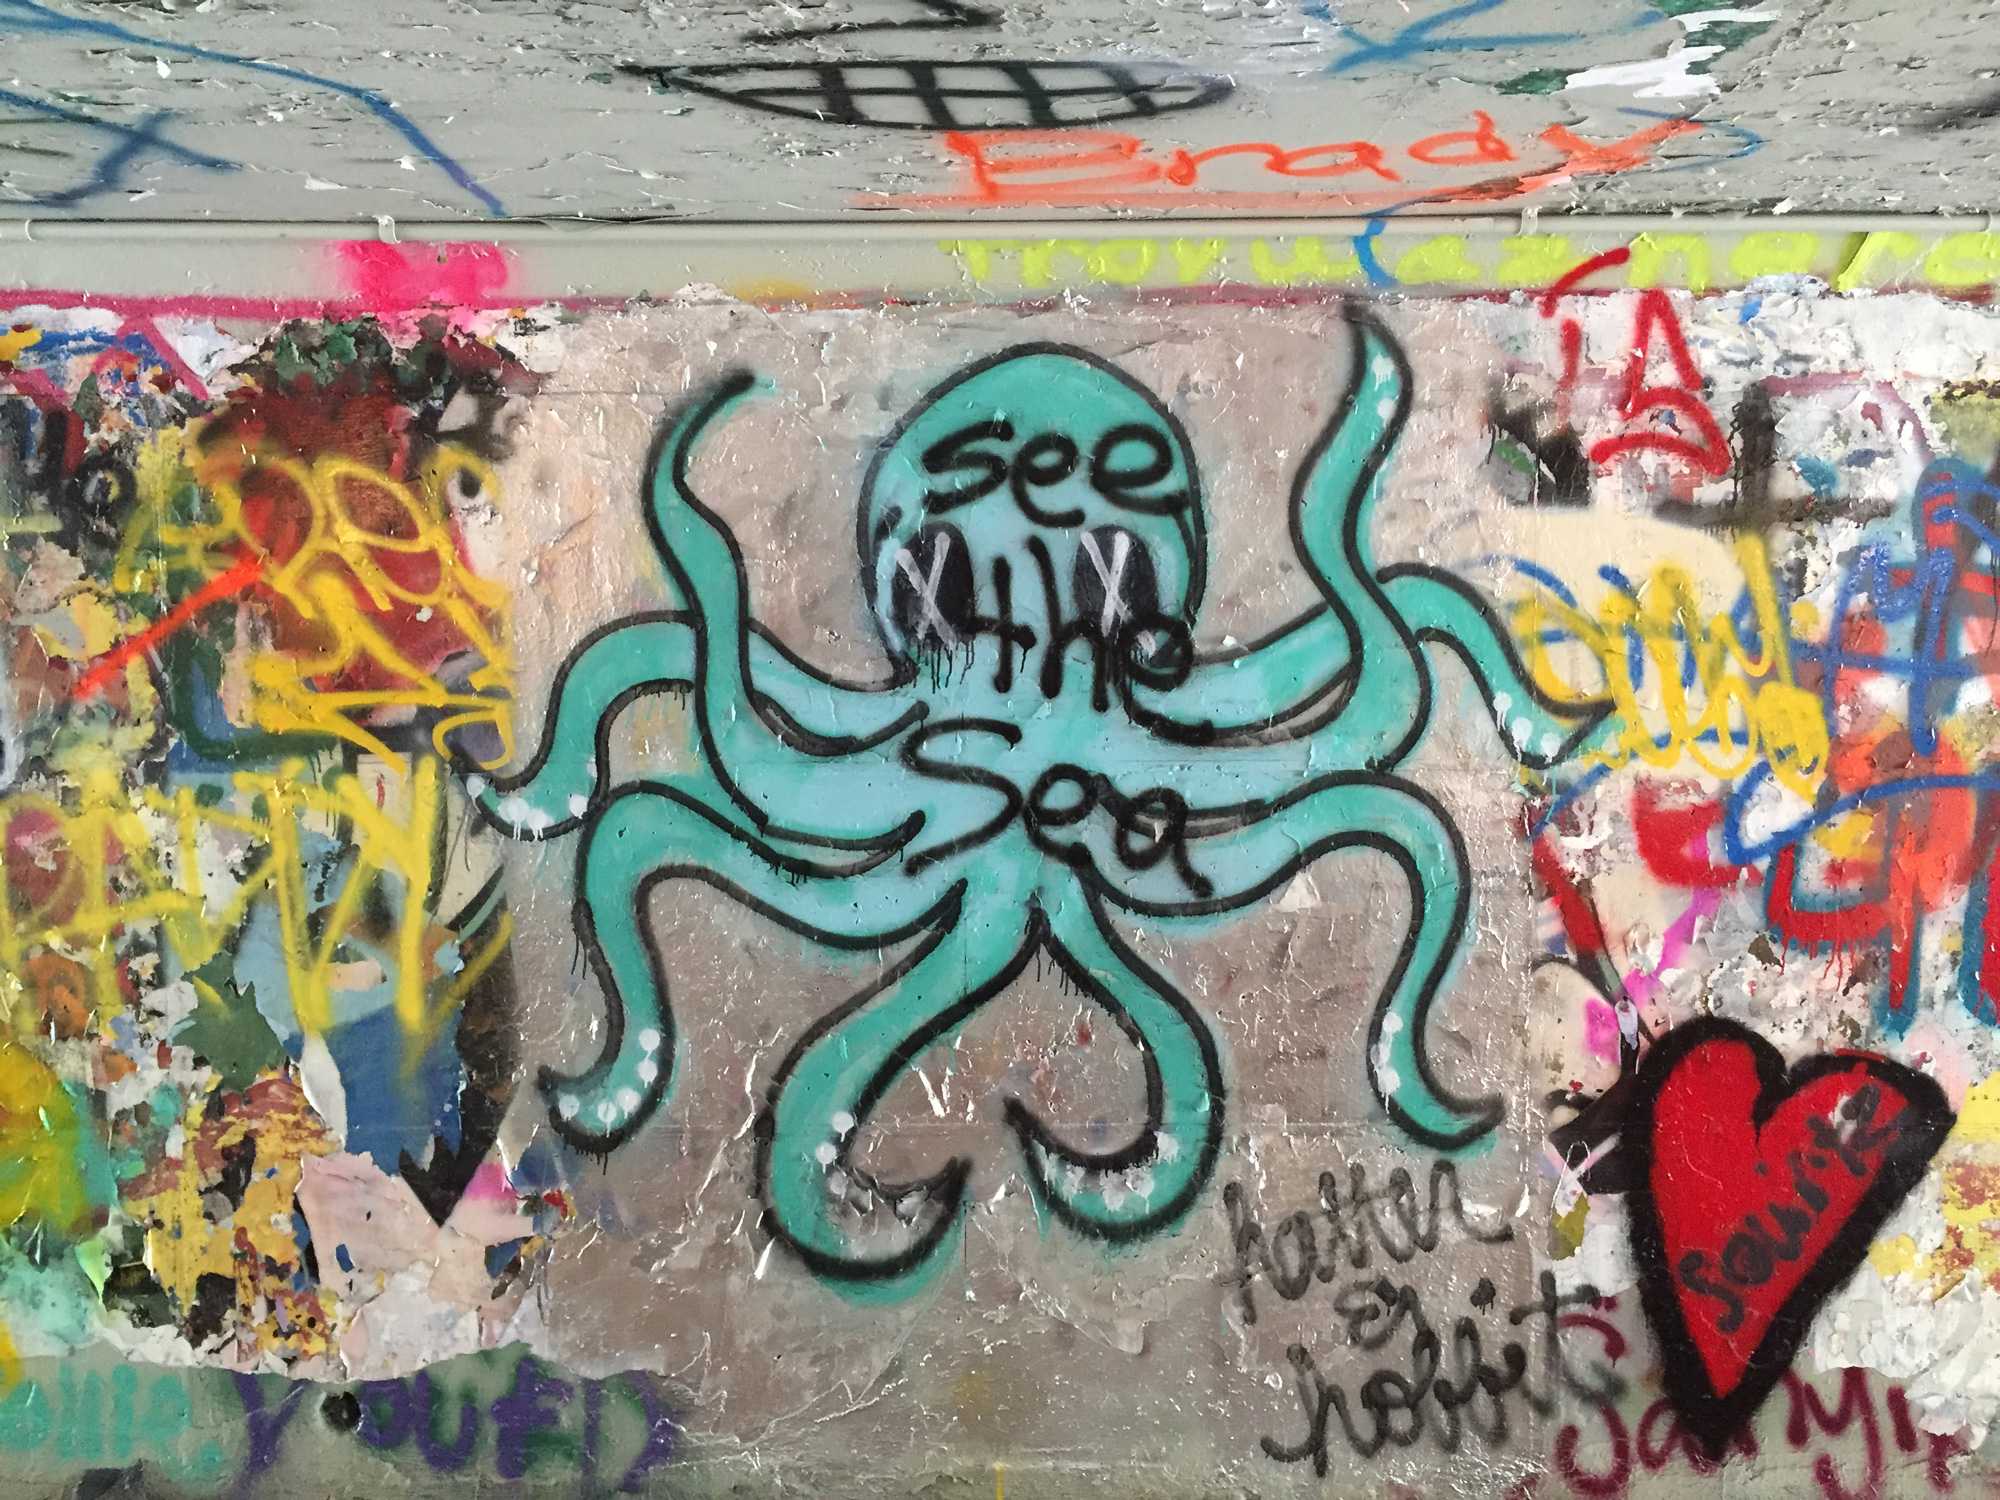 An octopus found in one of the expression tunnels with the phrase, “see the sea” painted over it. Artist unknown.